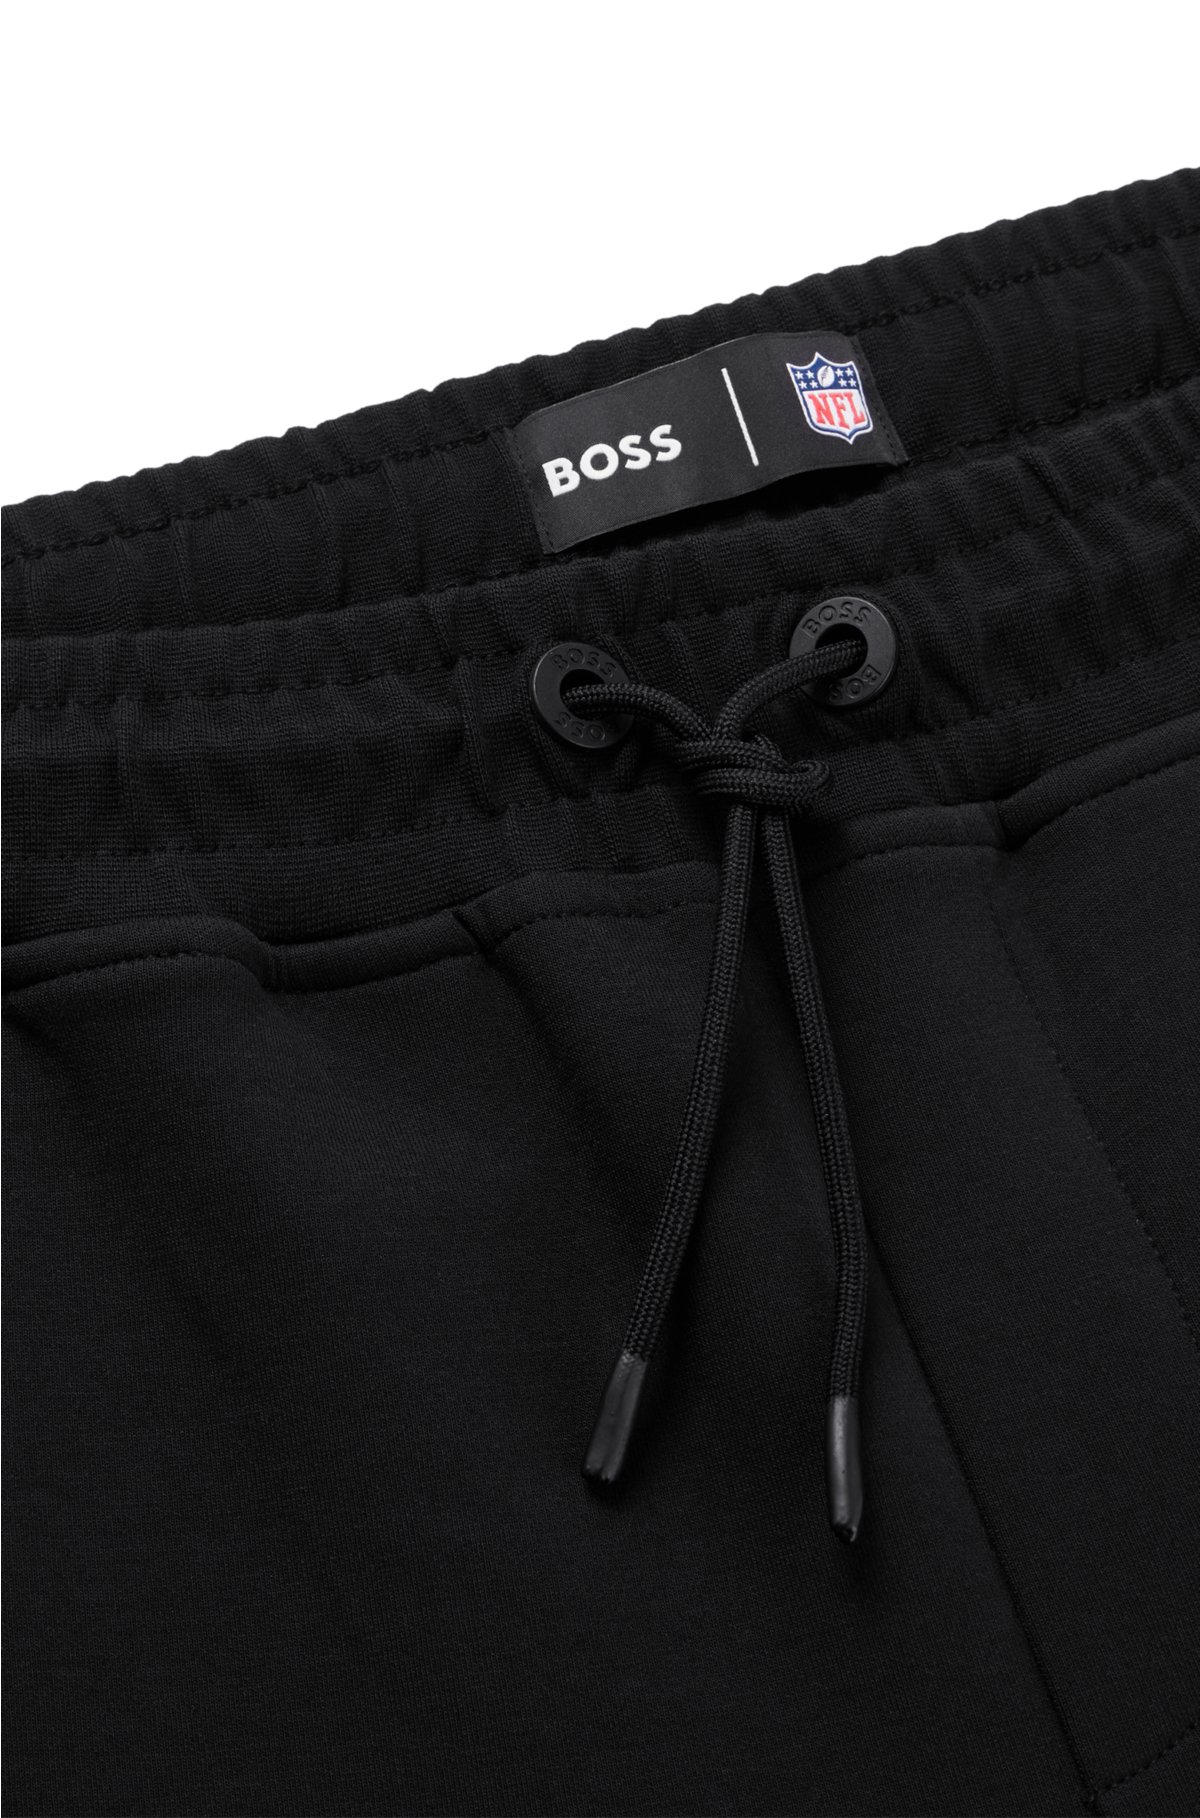 BOSS x NFL cotton-blend tracksuit bottoms with collaborative branding, 49ers